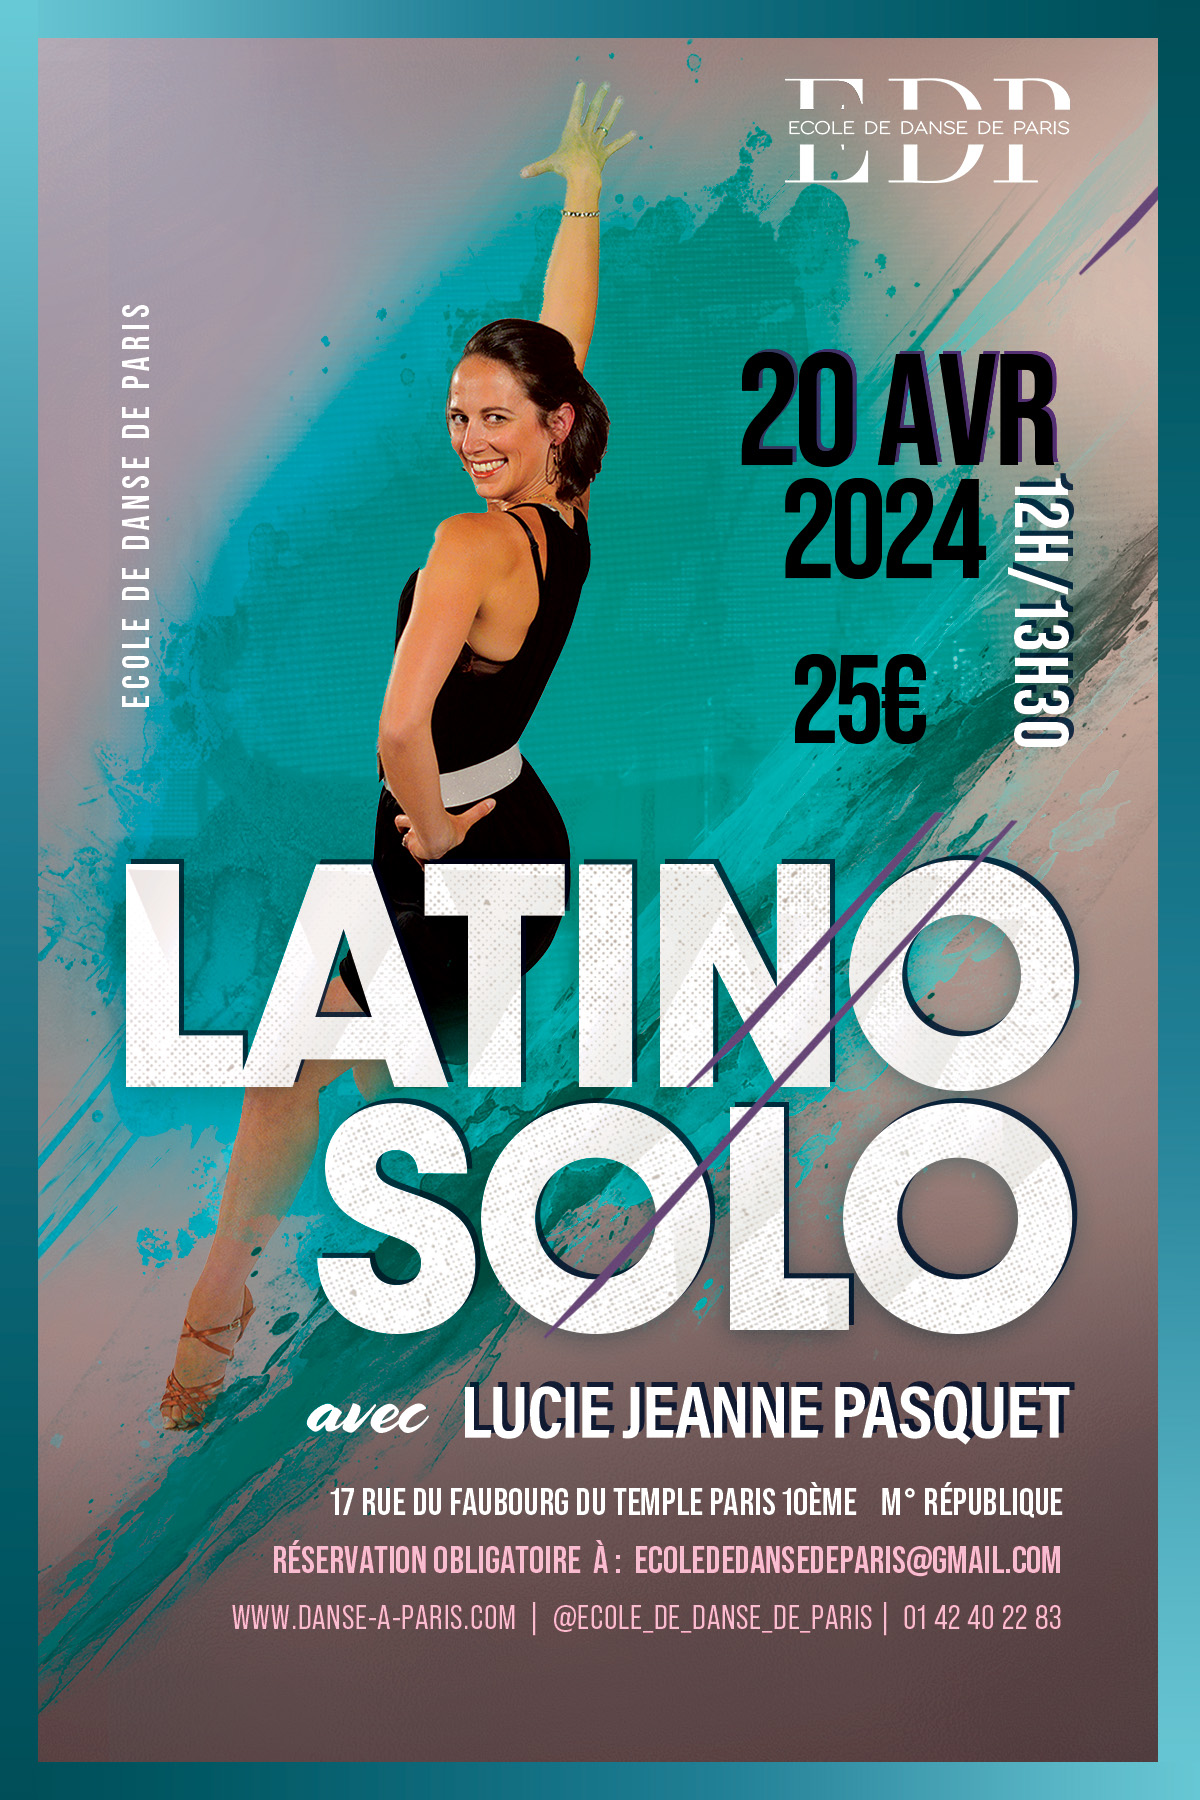 20/04 STAGE LATINO SOLO avec LUCIE